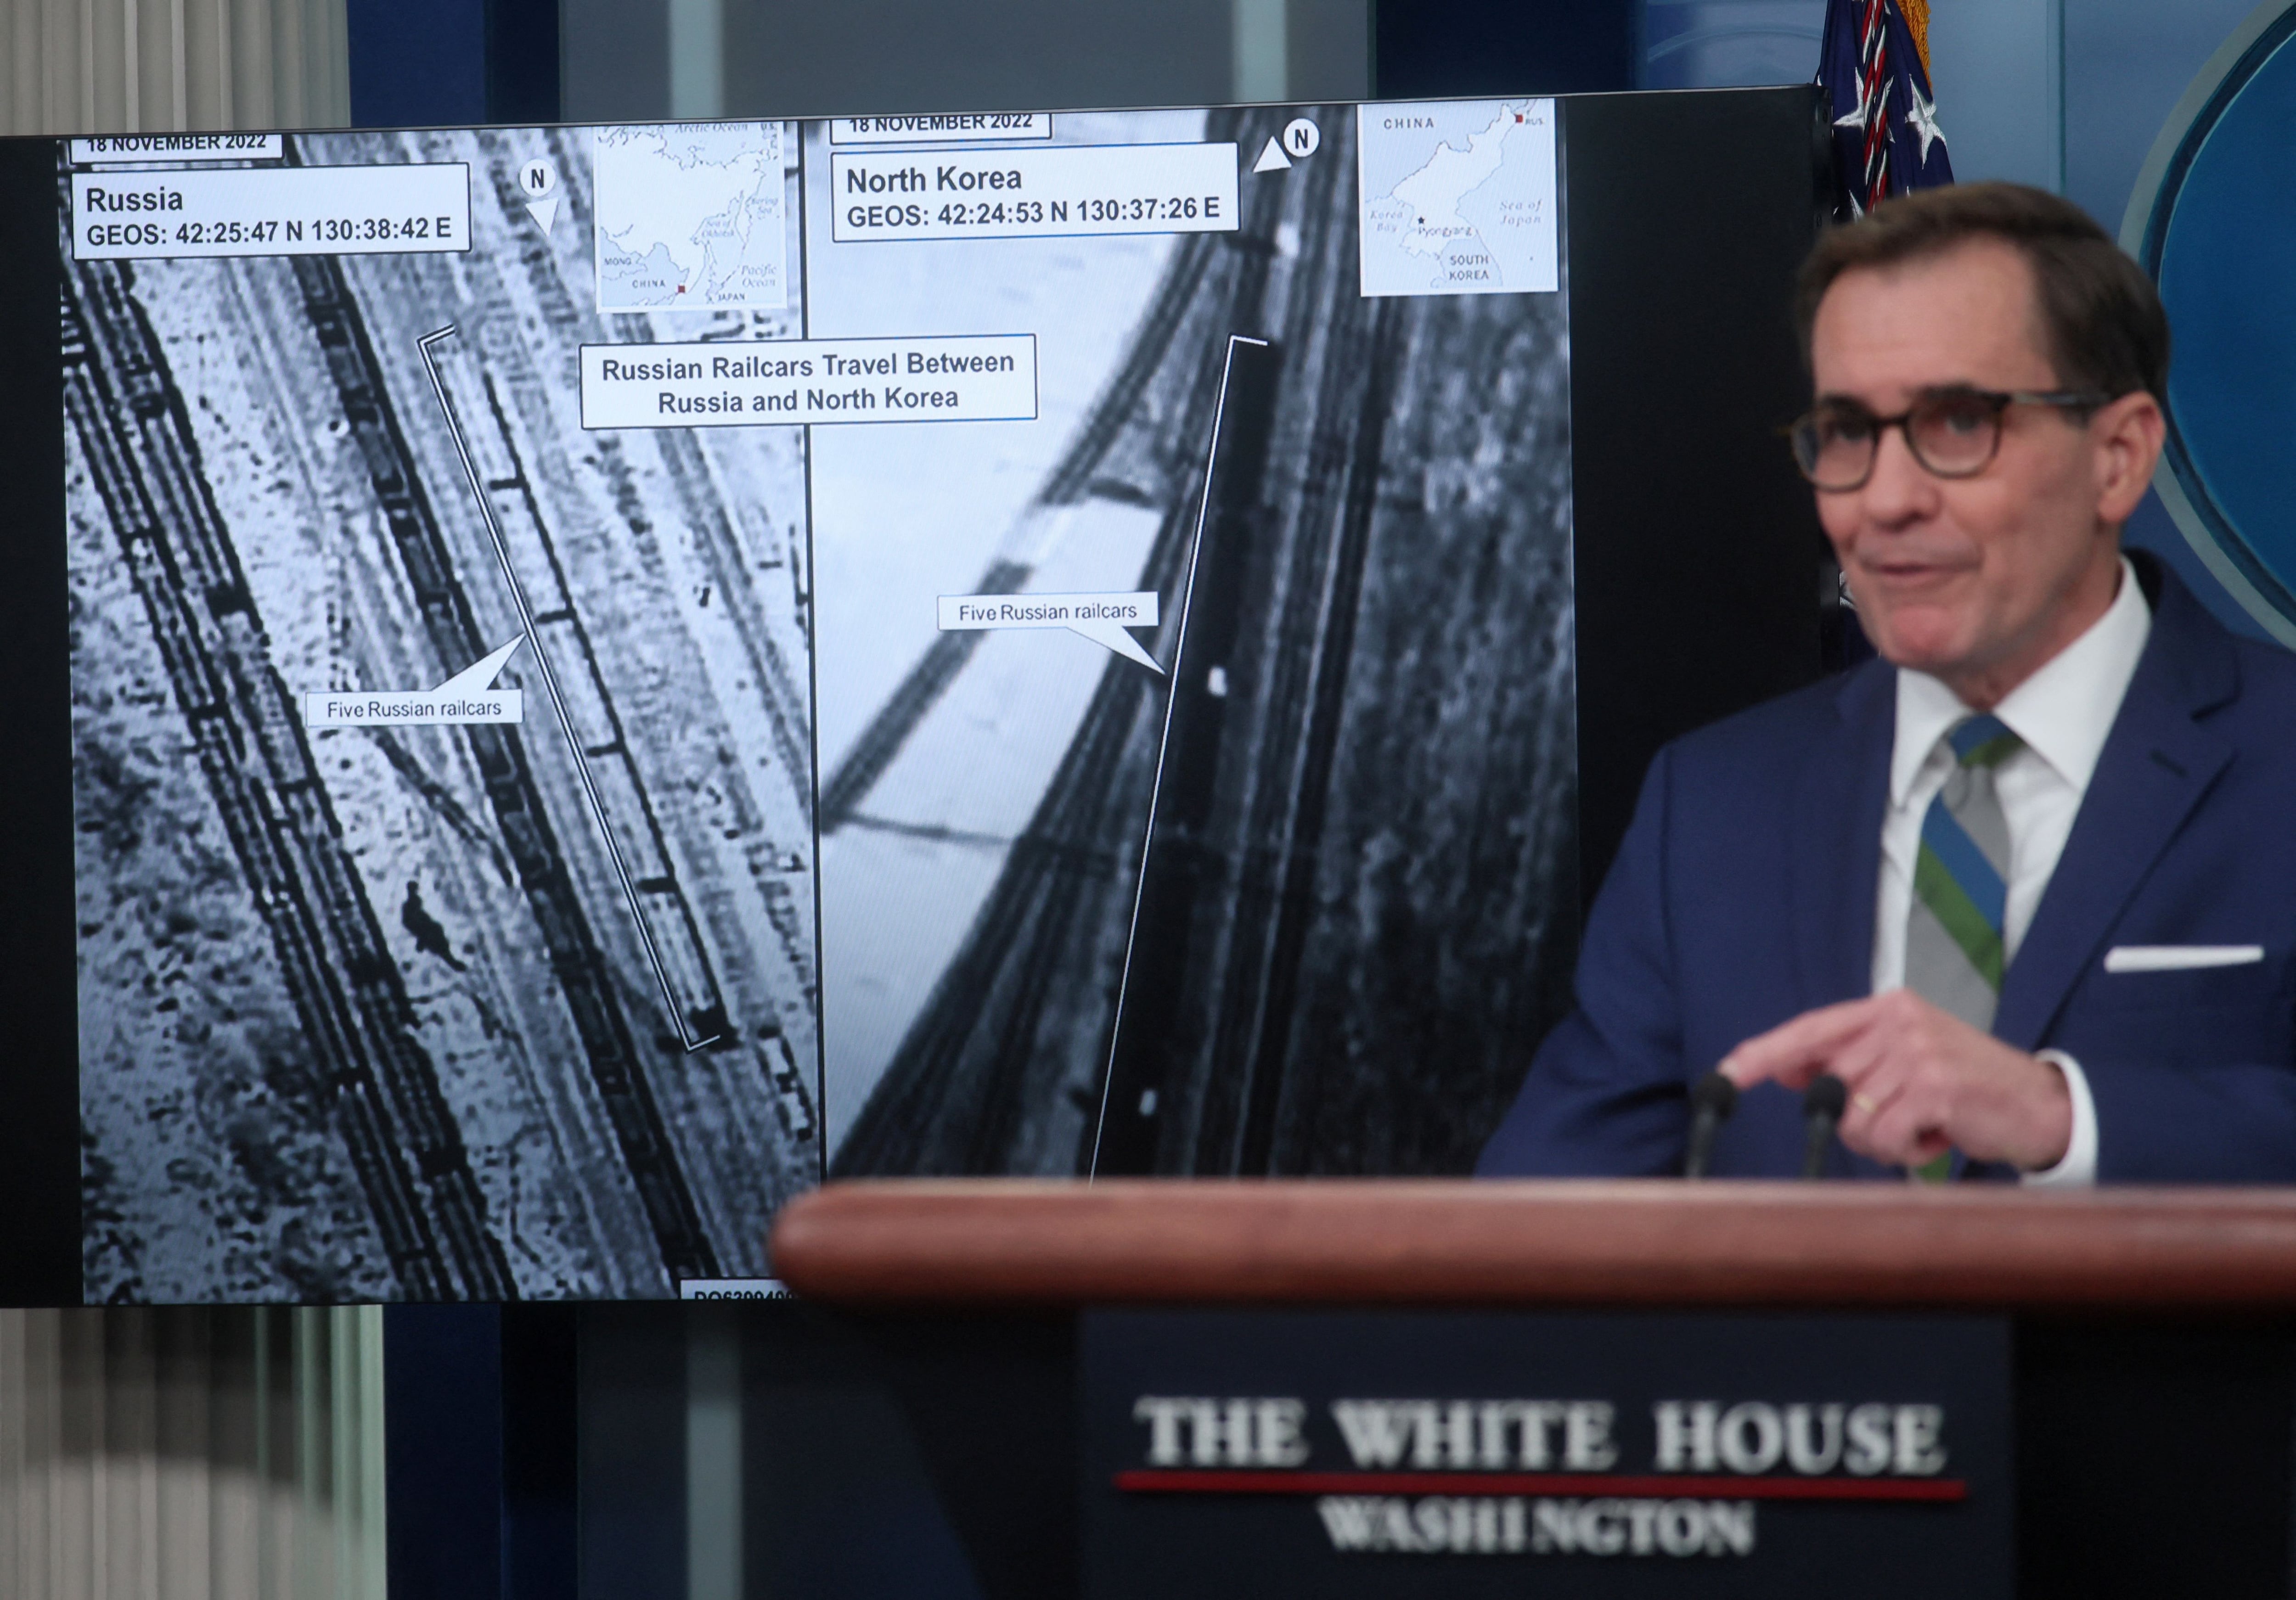 White House National Security Council Strategic Communications Coordinator John Kirby presents satellite images showing Russian railcars traveling between Russia and North Korea, during a press briefing at the White House in Washington, U.S., January 20, 2023. REUTERS/Leah Millis